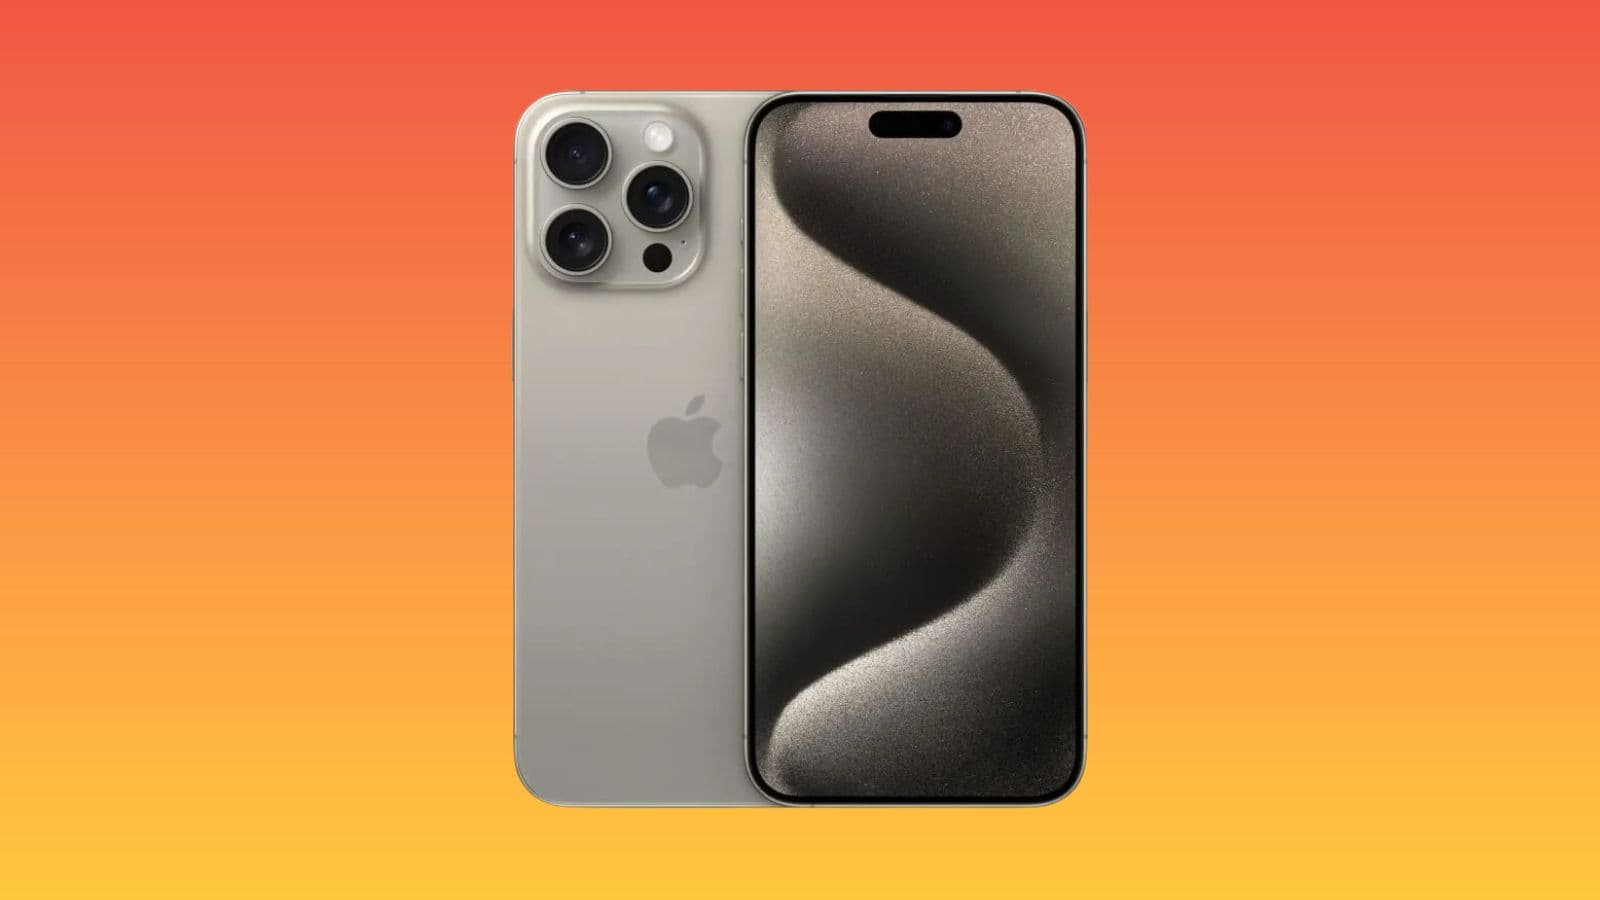 Apple’s latest iPhone 15 Pro Max is enjoying a promotion on Rakuten – an opportunity to take advantage!